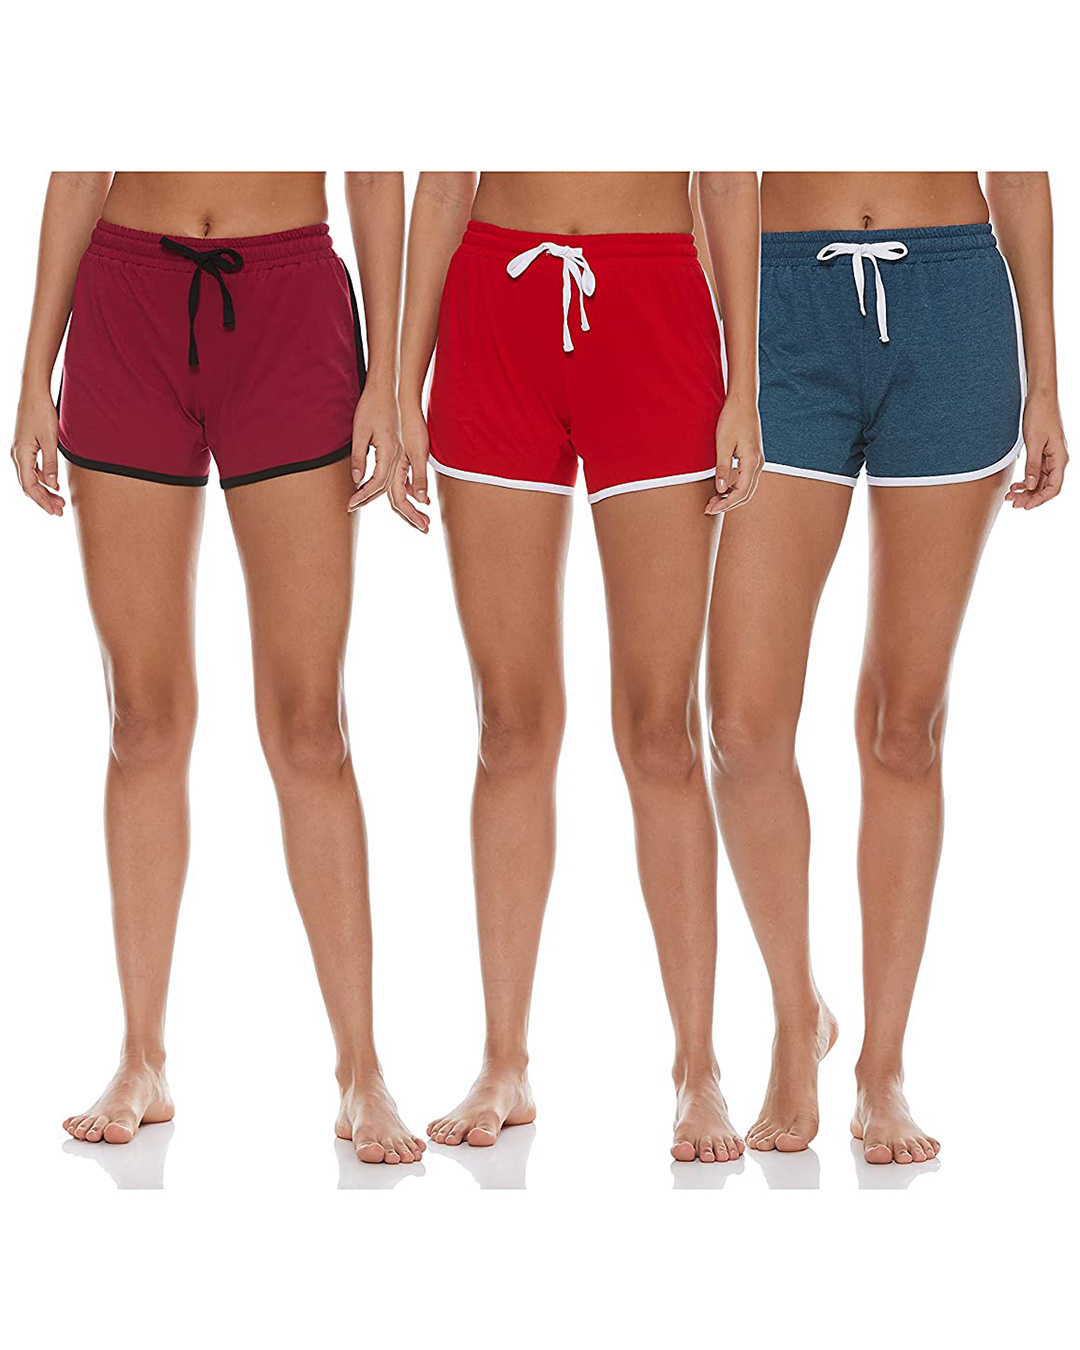 Buy Pack of 3 Women's Multicolor Cotton Yoga Shorts Online at Bewakoof